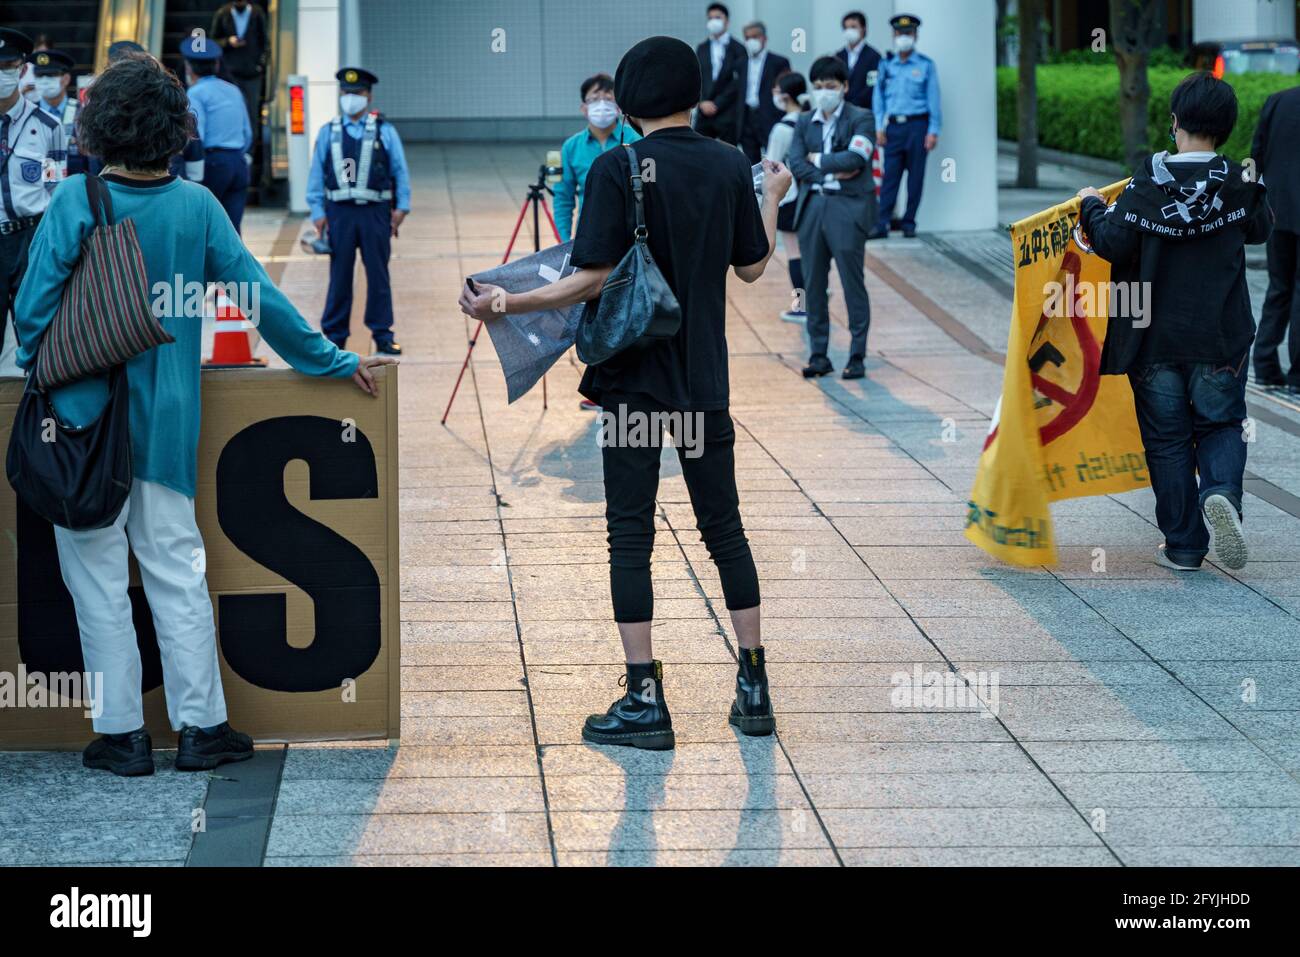 29 May 2021: Protest against the 2020/2021 Tokyo Olympics Stock Photo